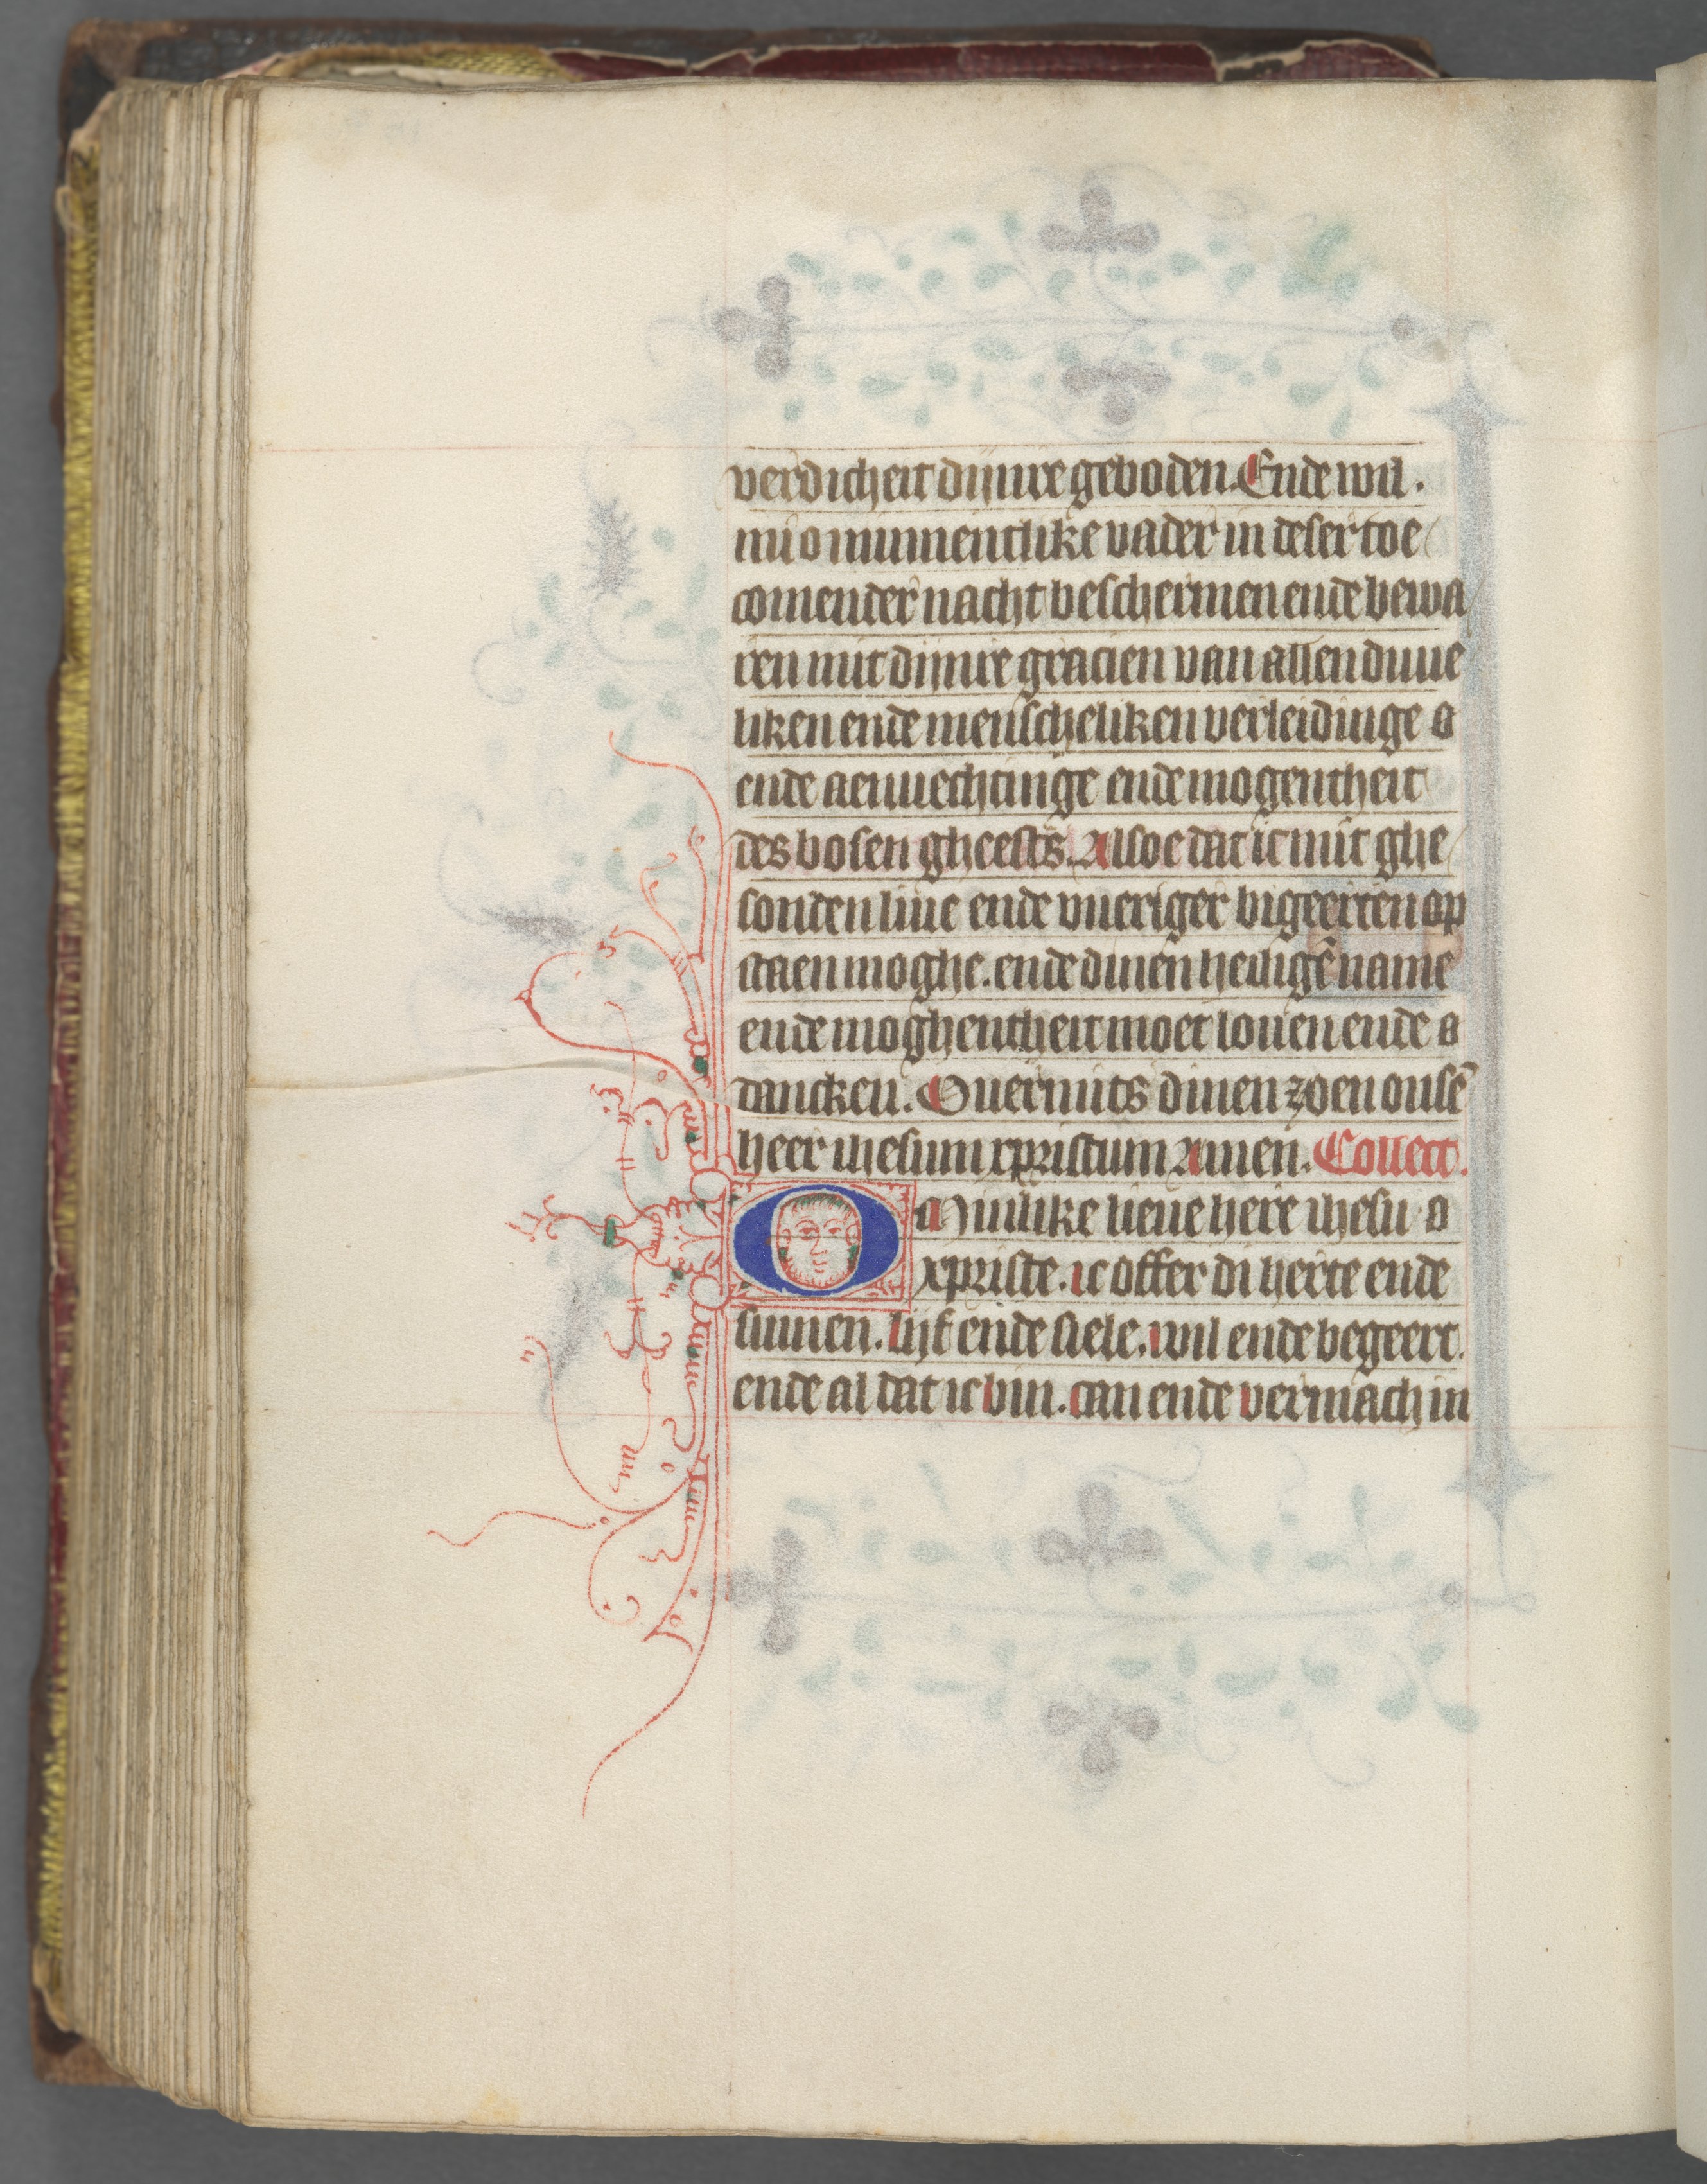 Book of Hours (Use of Utrecht): fol. 157v, Text